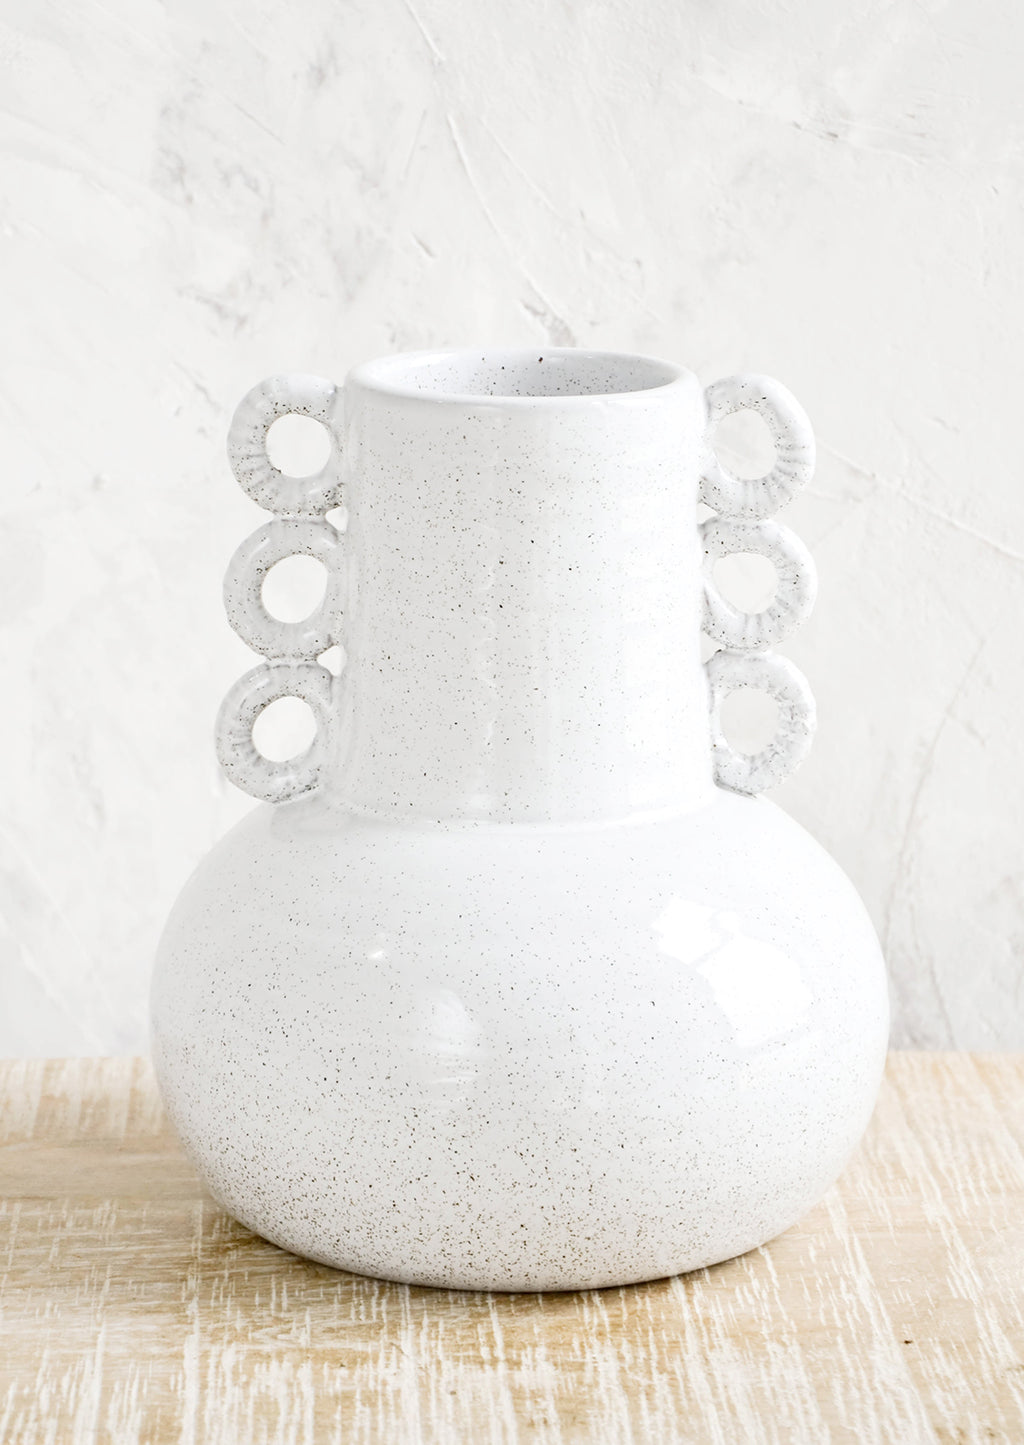 1: Ceramic vase in speckled white glaze. Shape is bulbous at bottom with tapered top and decorative round handles at sides.